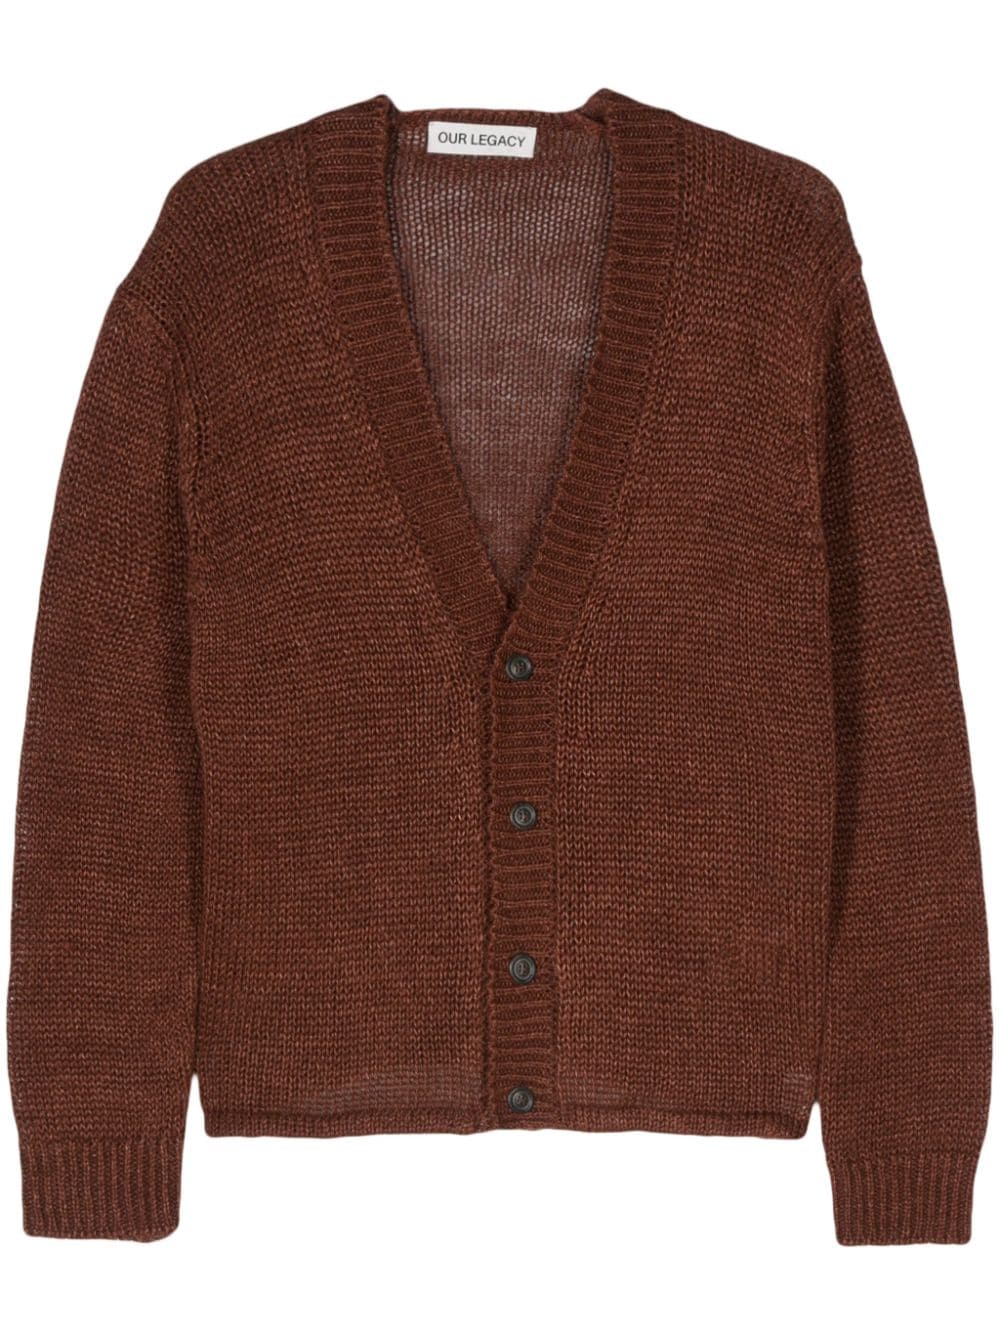 OUR LEGACY Academy chevron-knit cardigan - Brown von OUR LEGACY